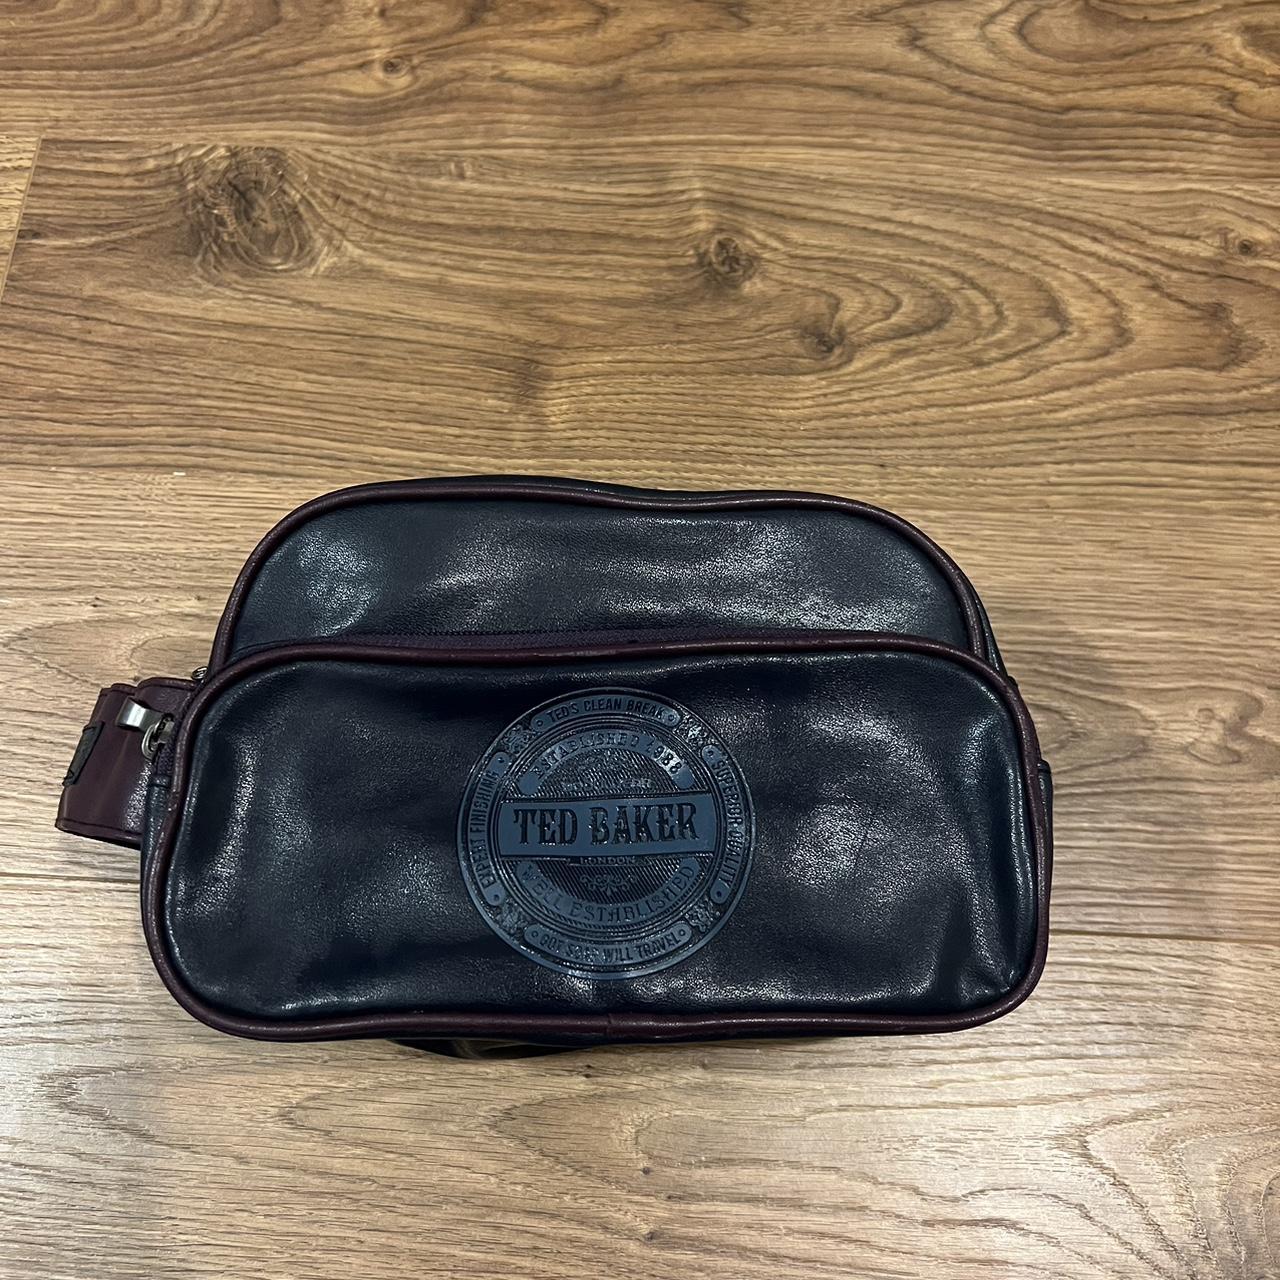 Ted Baker Wash bag - Perfect condition - Depop